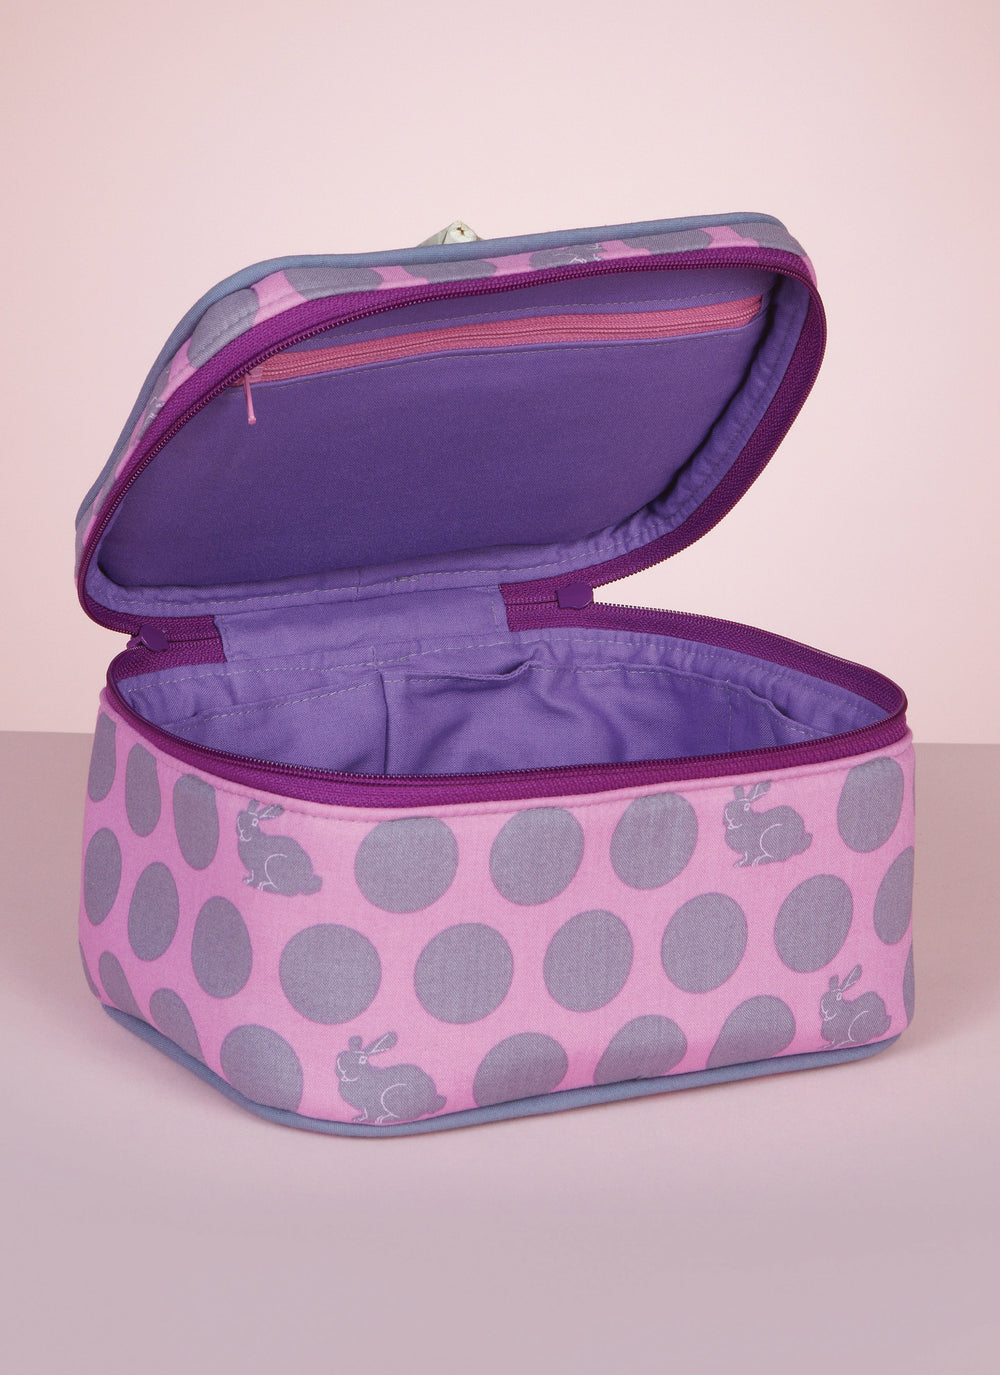 M7487 Travel Cases in Three Sizes from Jaycotts Sewing Supplies